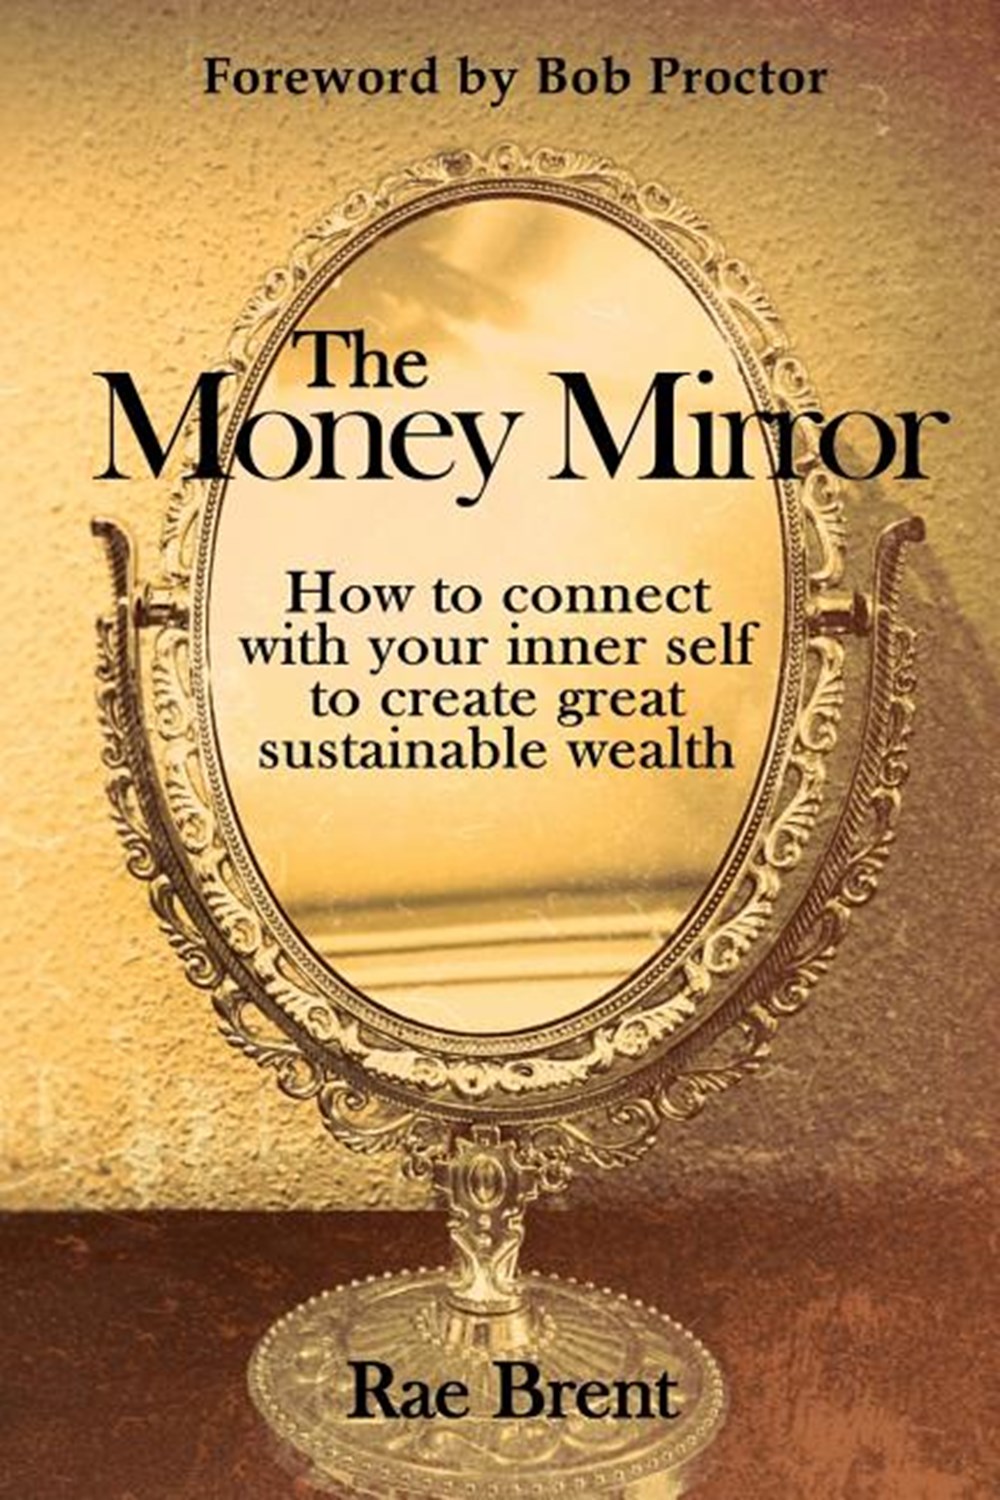 Money Mirror: How to Connect with Your Inner Self to Create Great Sustainable Wealth